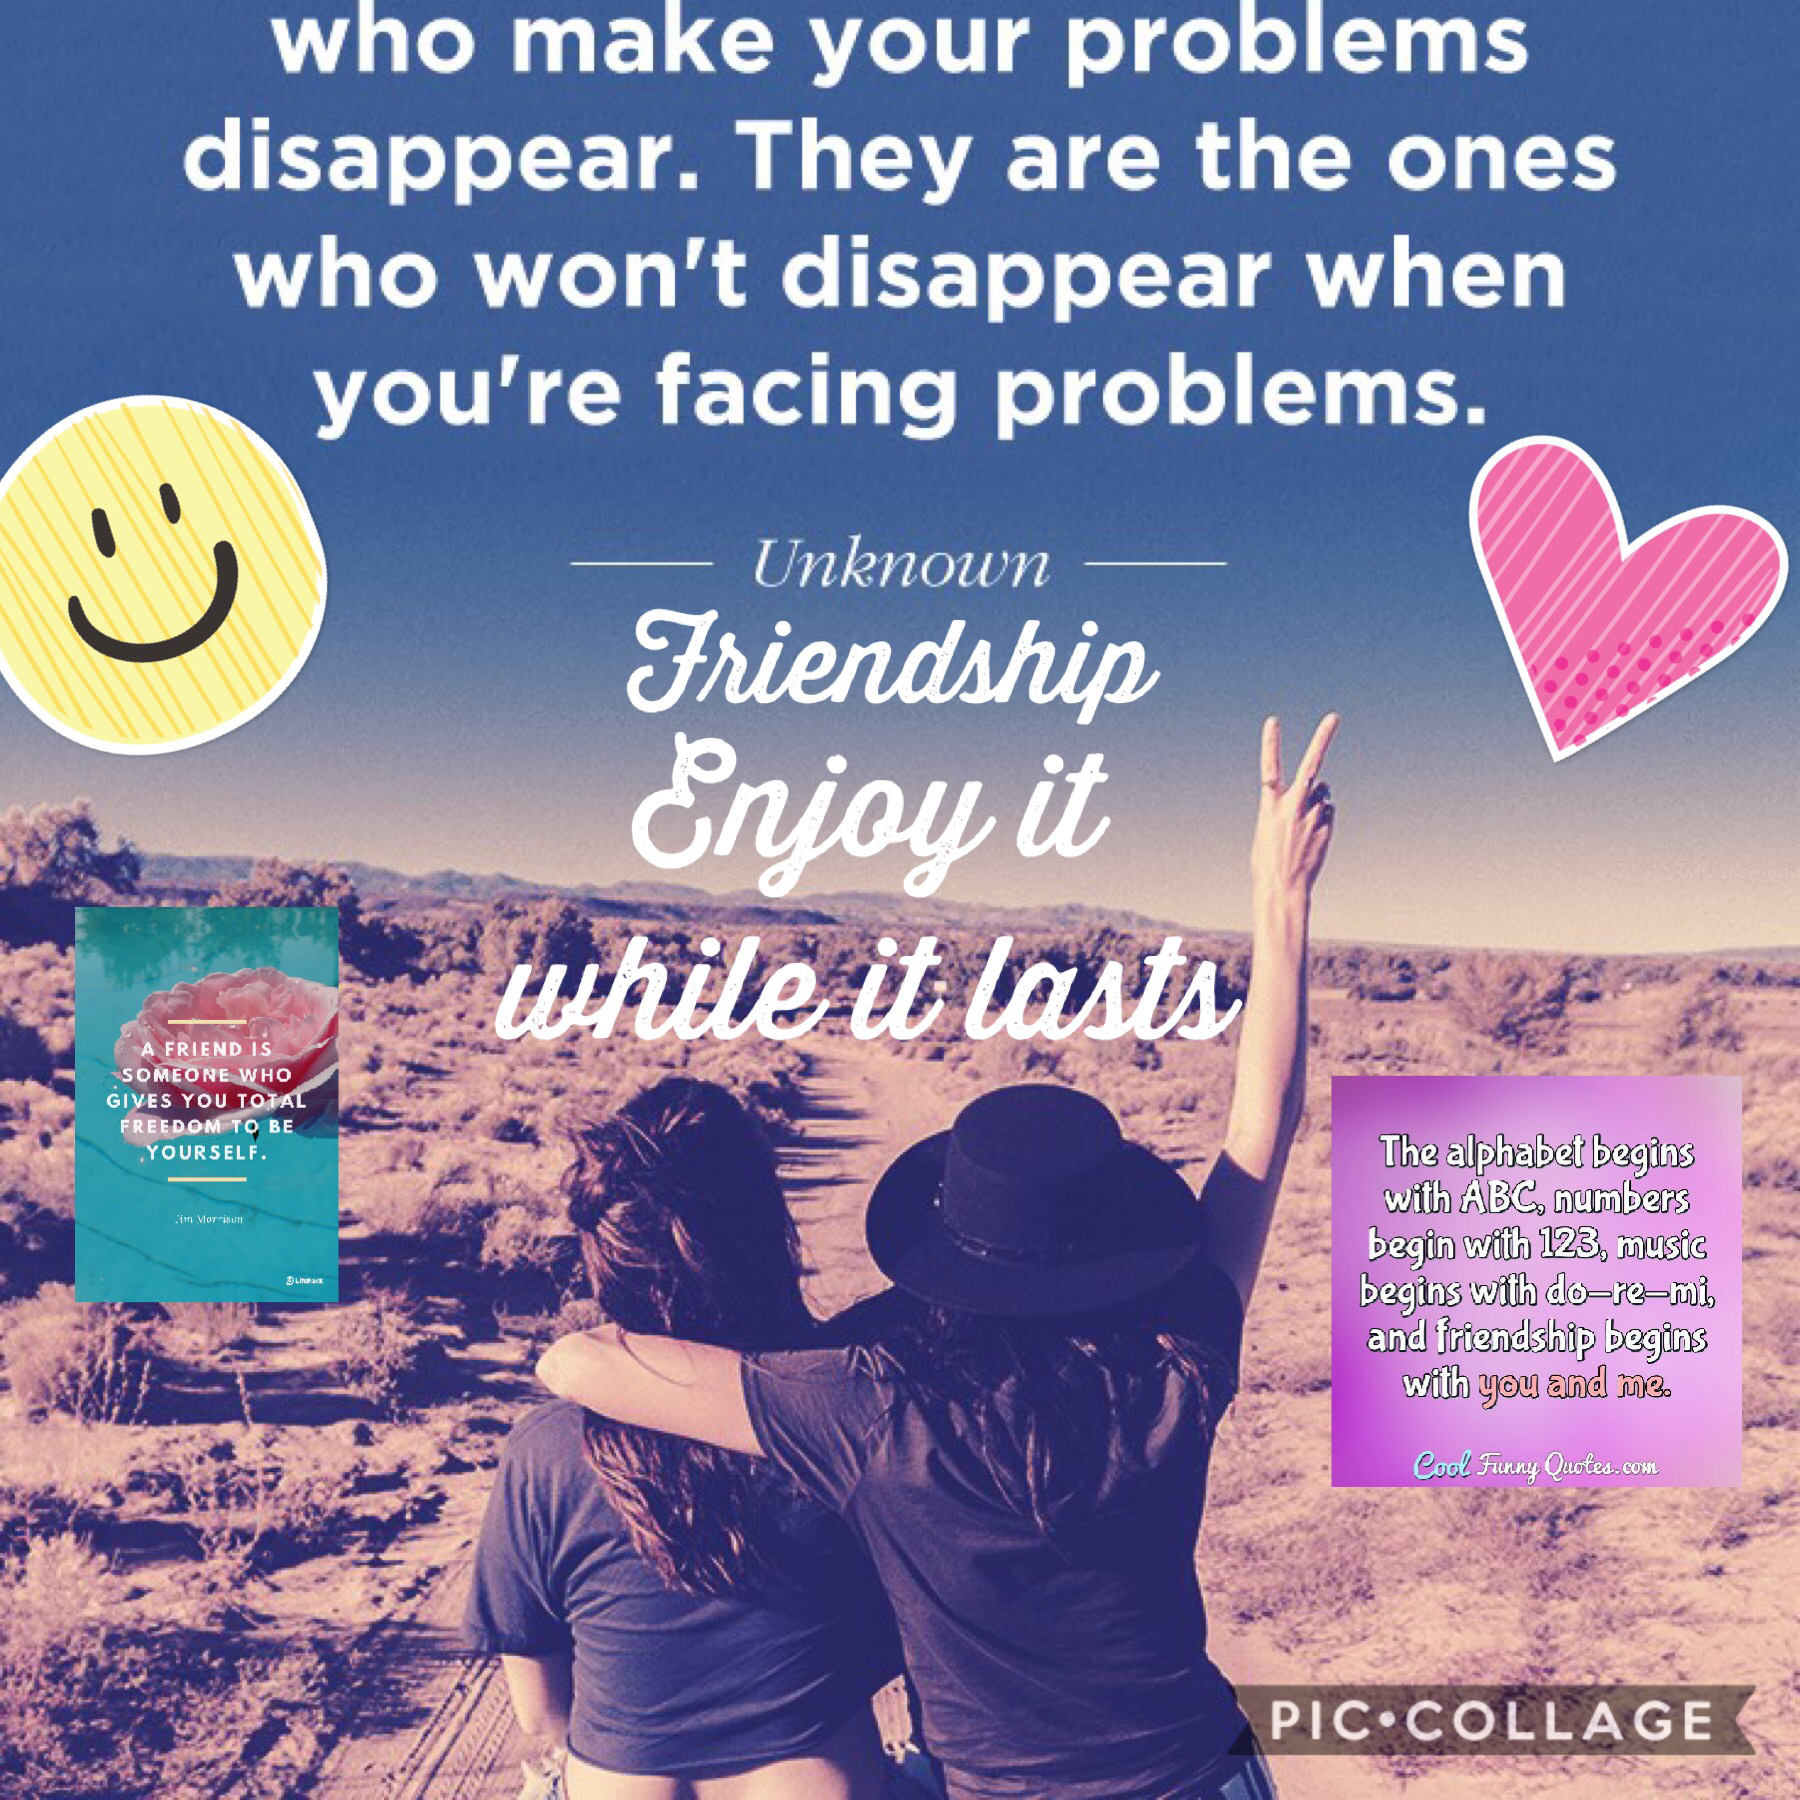 Friendship enjoy it while it lasts (I made this bc there’s loads of drama going on for me and I feel like this will make people stop) P.S the drama is on fancy key pro